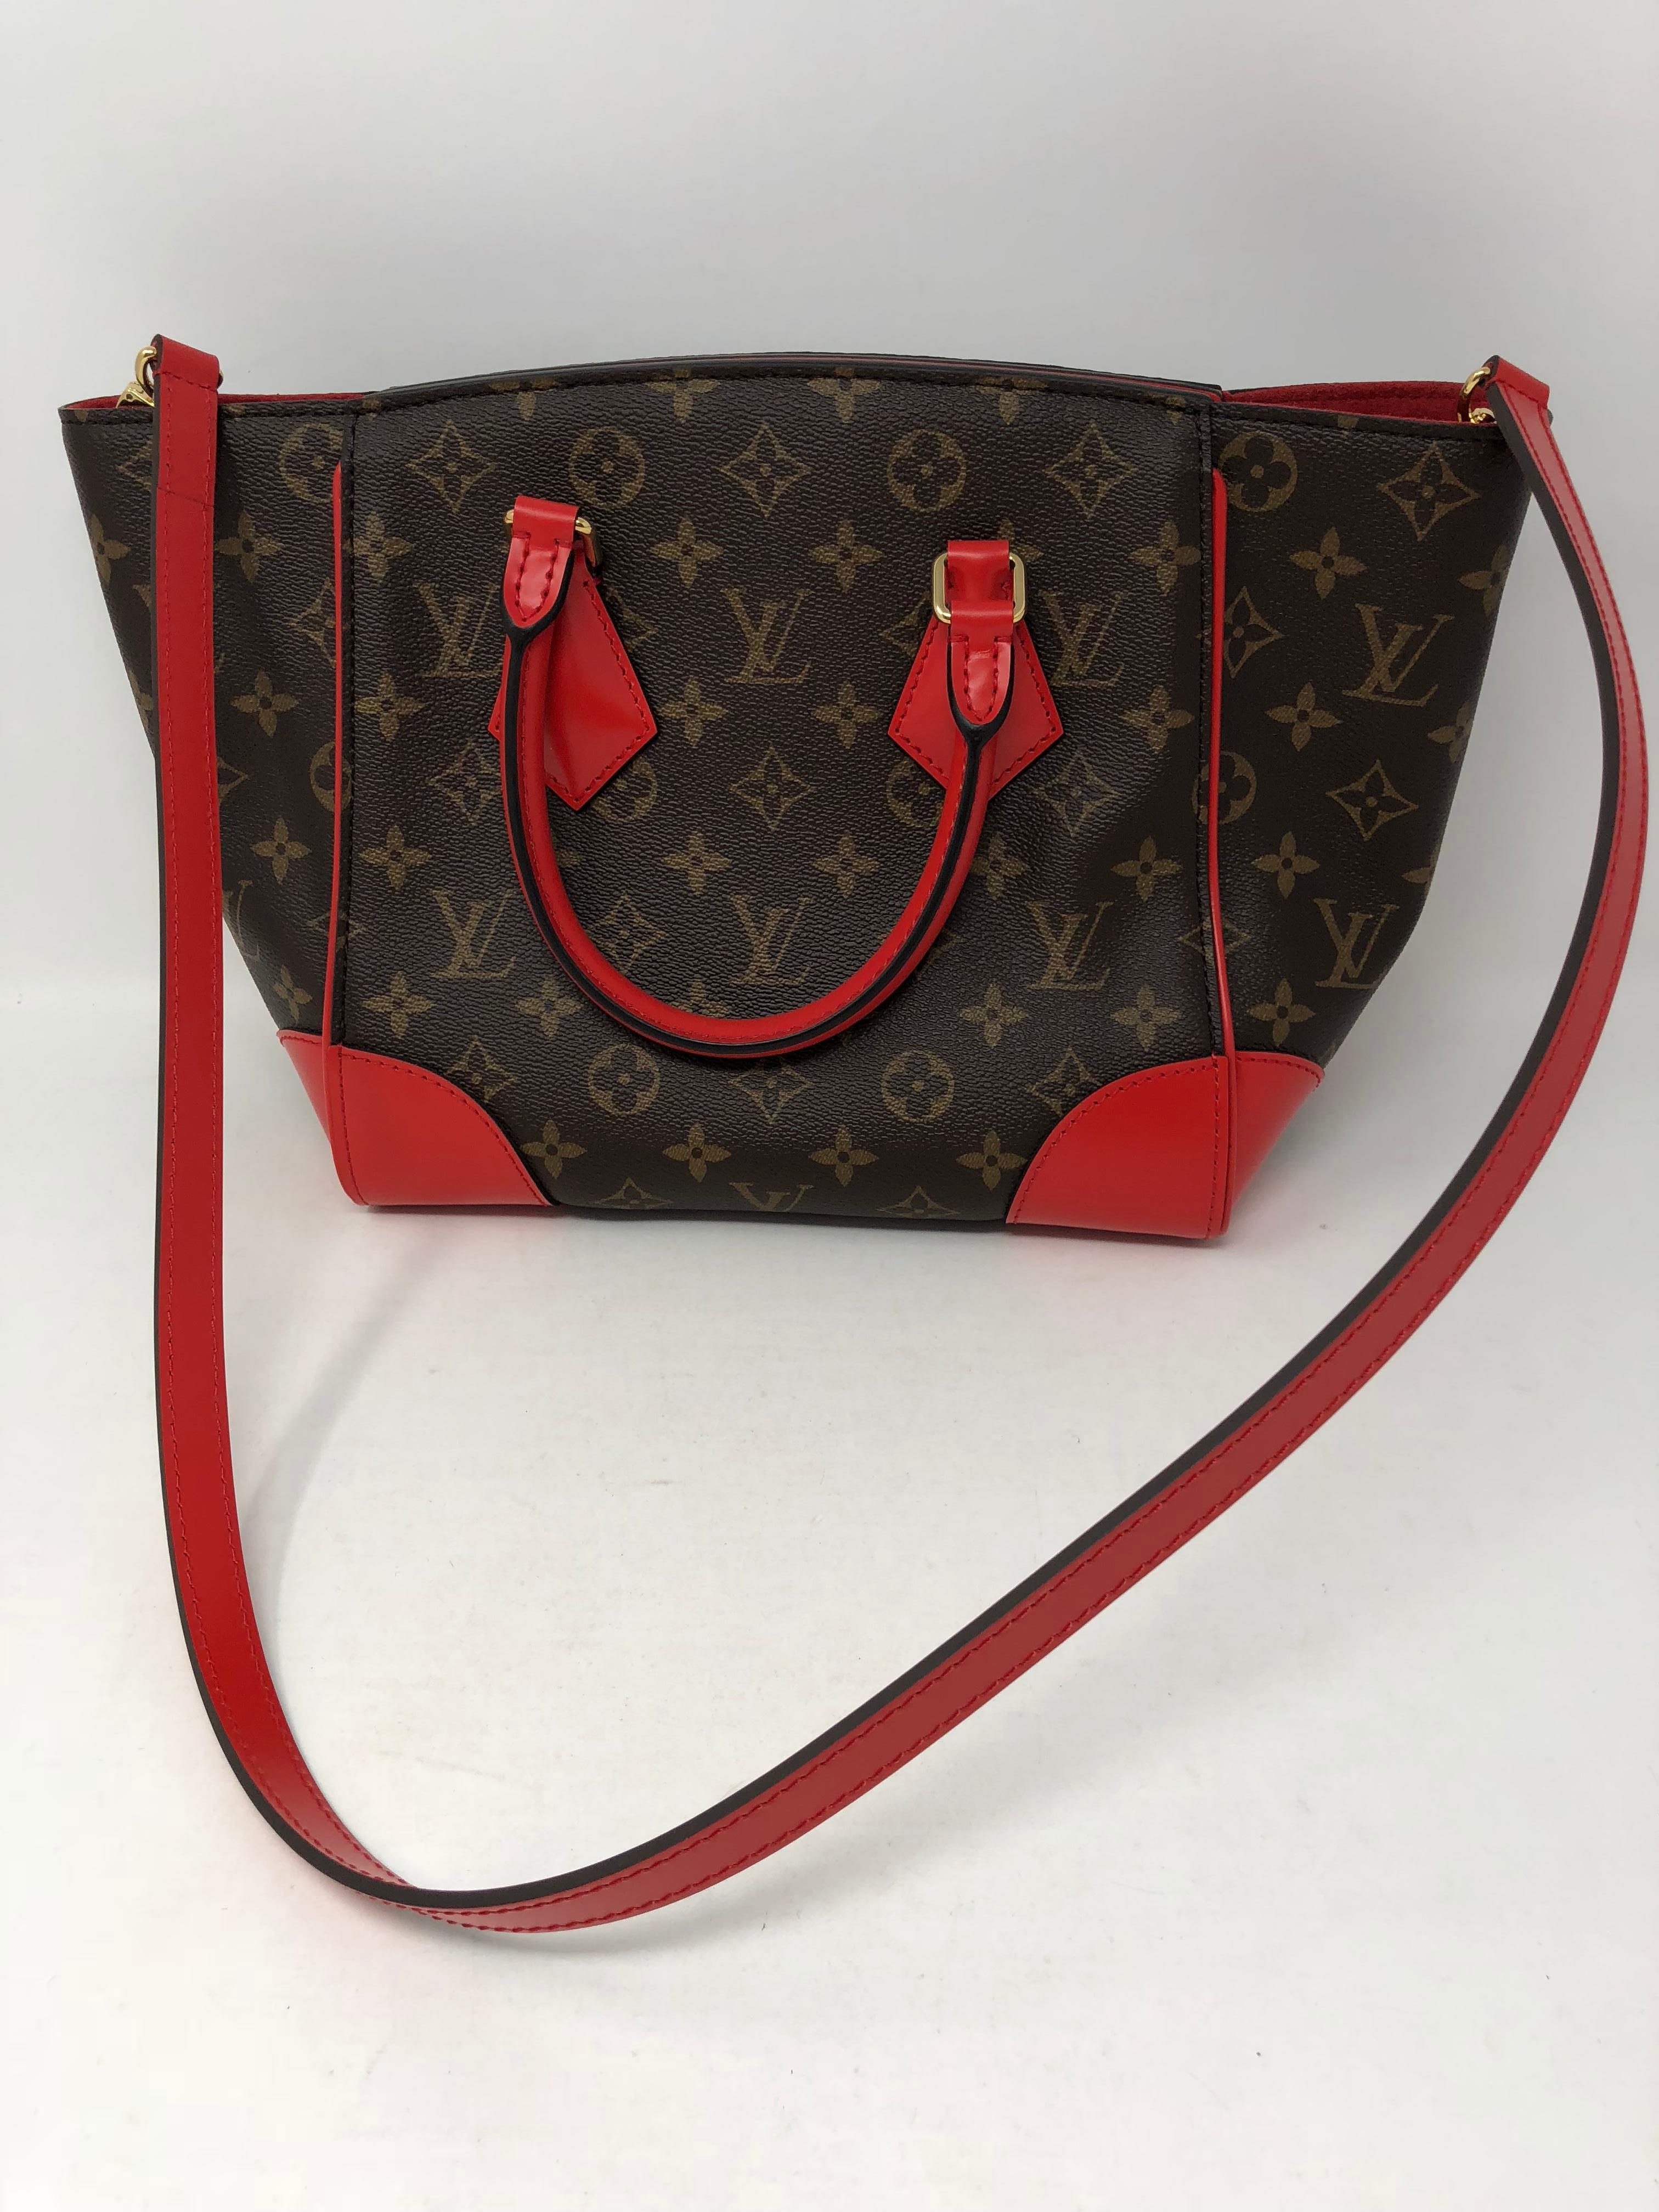 Loui Vuitton Phenix PM in Coquelicot (Red)  Monogram with red leather trim and shoulder bag. Classic tolie monogram canvas and red calfskin leather details on the bag. Gold hardware. Spacious and versatile bag with a hidden magnet that opens and